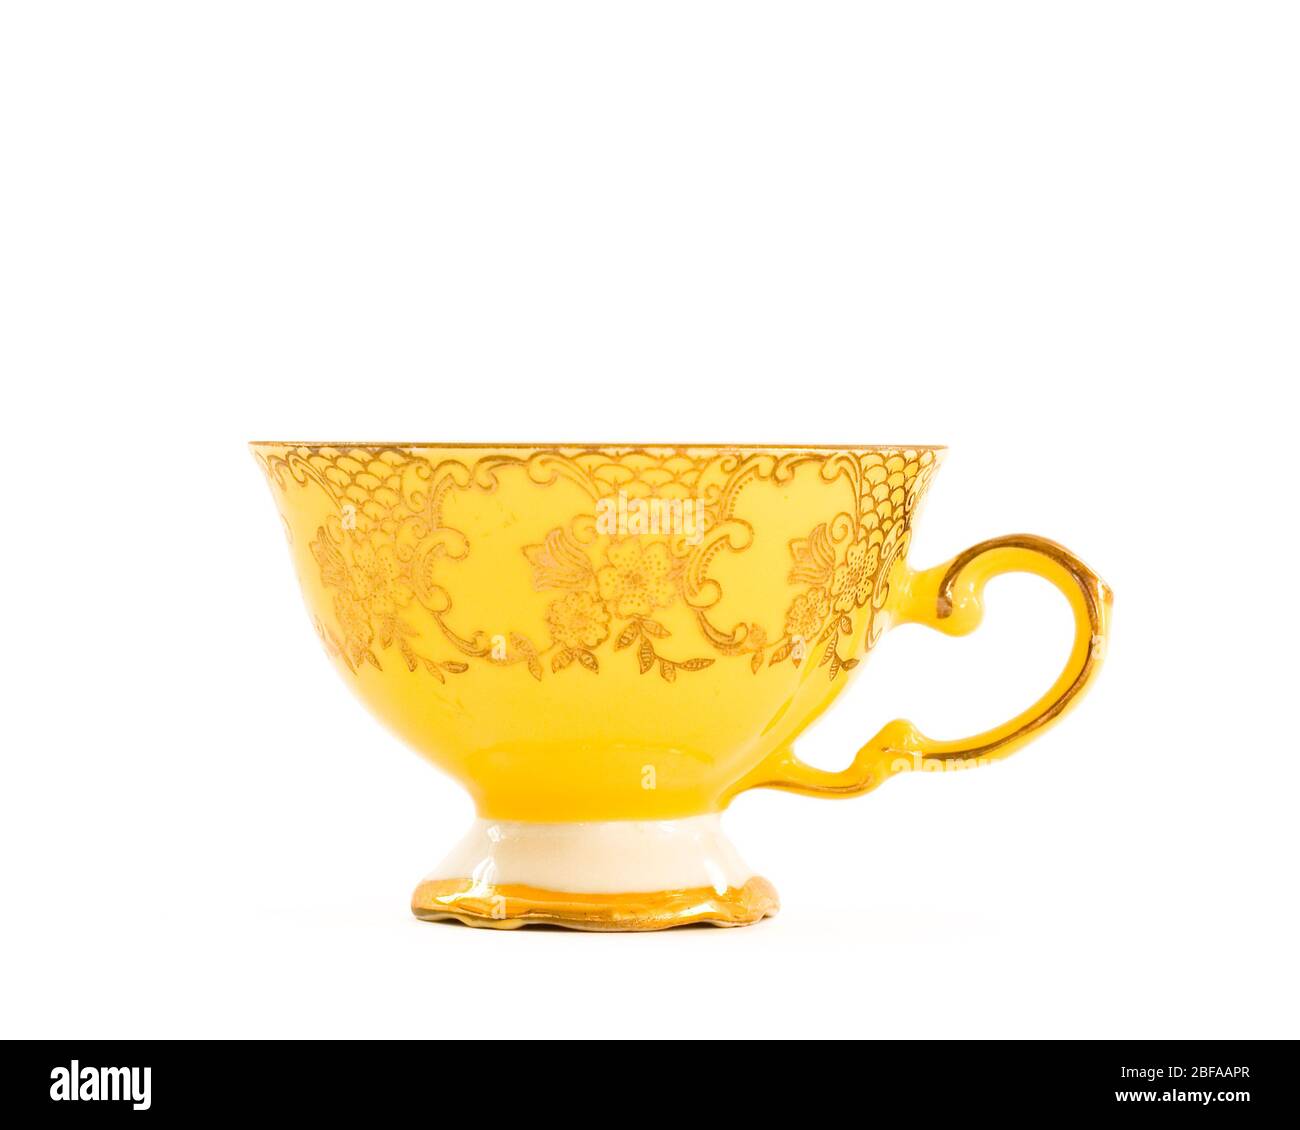 Single brightly coloured vintage tea cup with elegant floral design in gold. Retro, kitsch design. Isolated on white background. Stock Photo